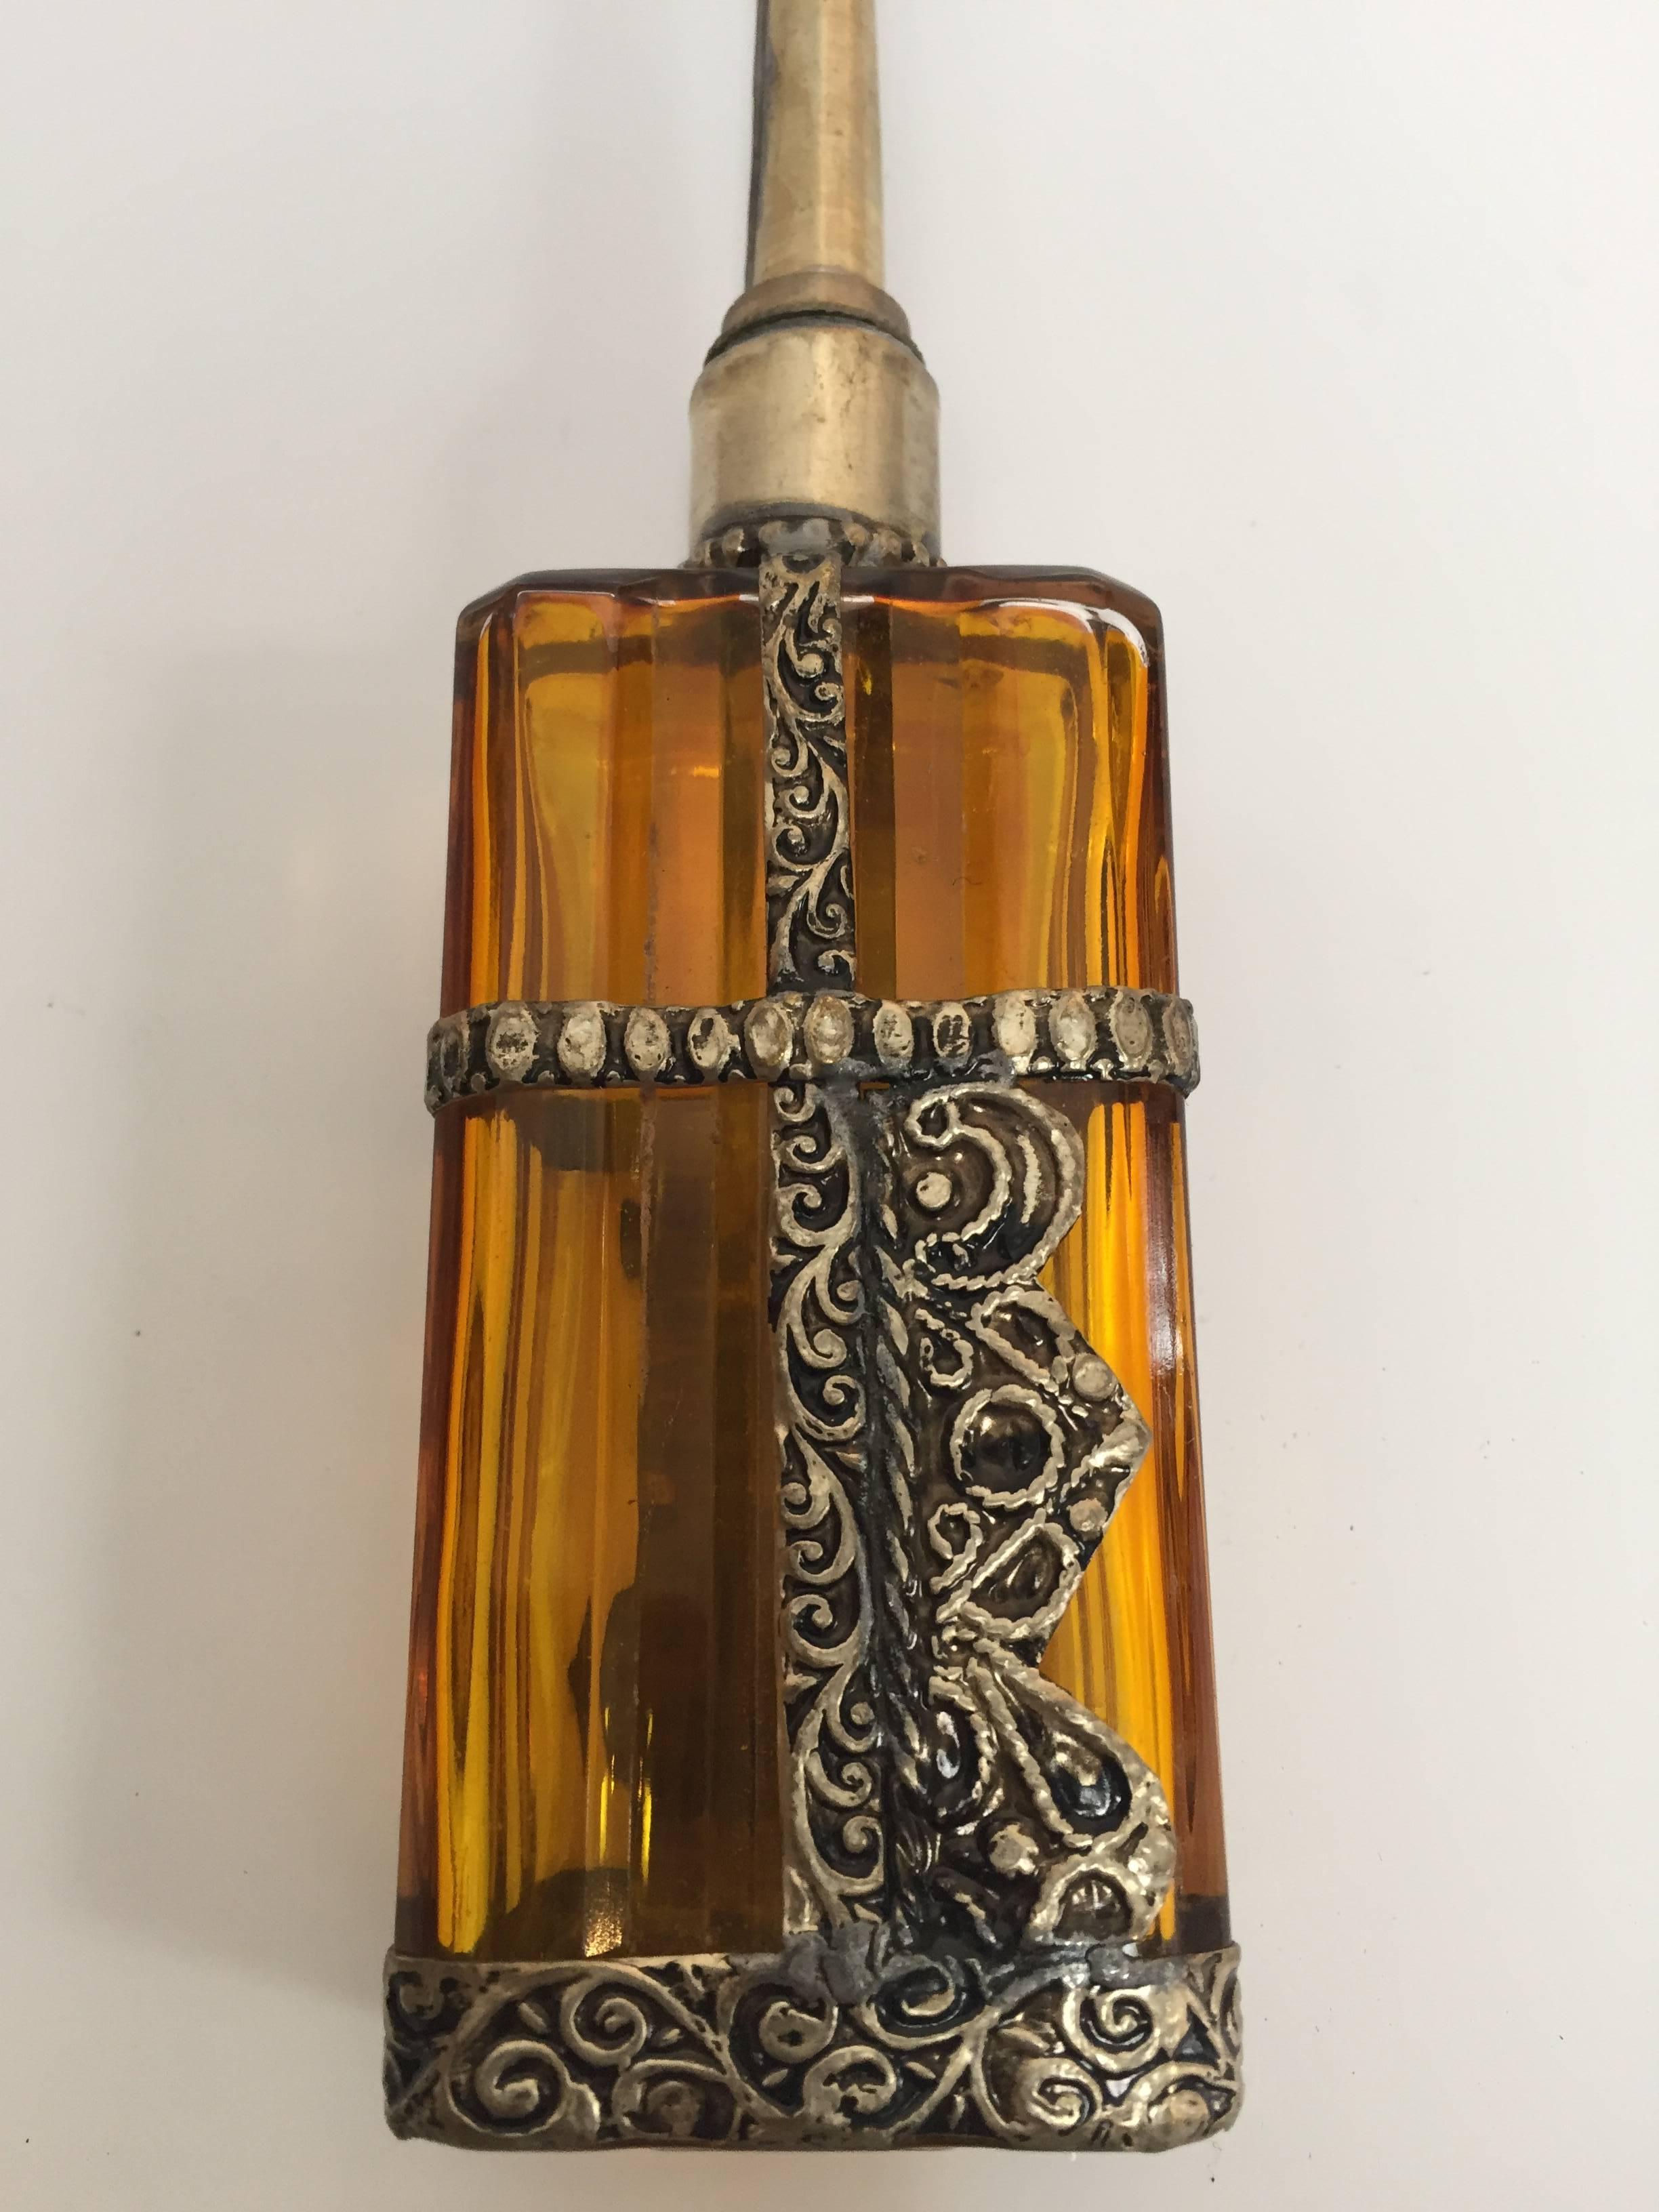 Handcrafted Moroccan glass perfume bottle or rose water sprinkler with raised embossed silvered metal floral design over amber glass.
The pressed glass bottle in Art Deco, Art Nouveau style is in rectangular shape and hand decorated with embossed